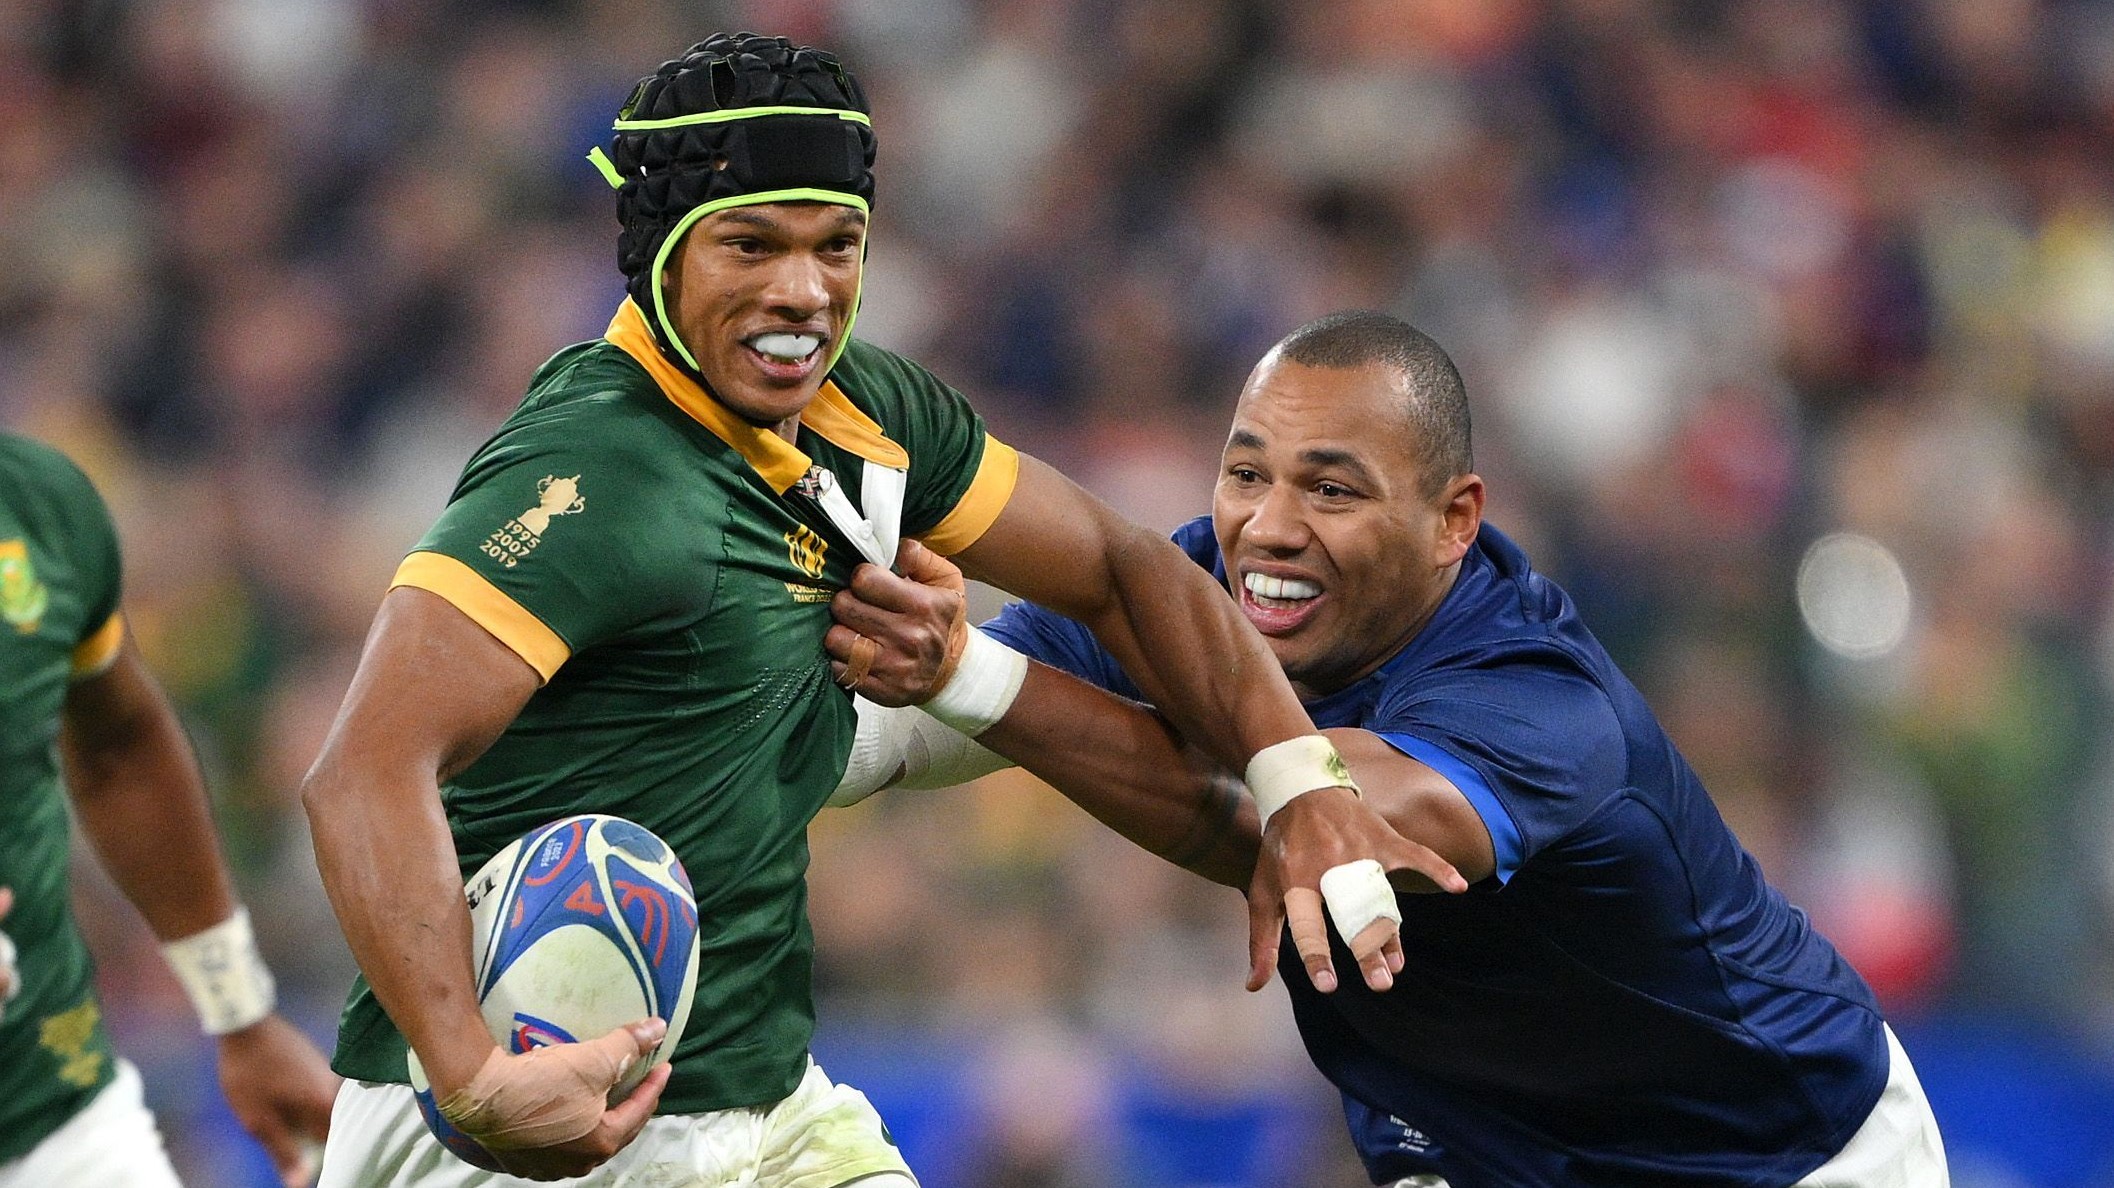 PARIS, FRANCE - OCTOBER 15: Kurt-Lee Arendse of South Africa is tackled by Gael Fickou of France during the Rugby World Cup France 2023 Quarter Final match between France and South Africa at Stade de France on October 15, 2023 in Paris, France. (Photo by David Ramos - World Rugby/World Rugby via Getty Images)